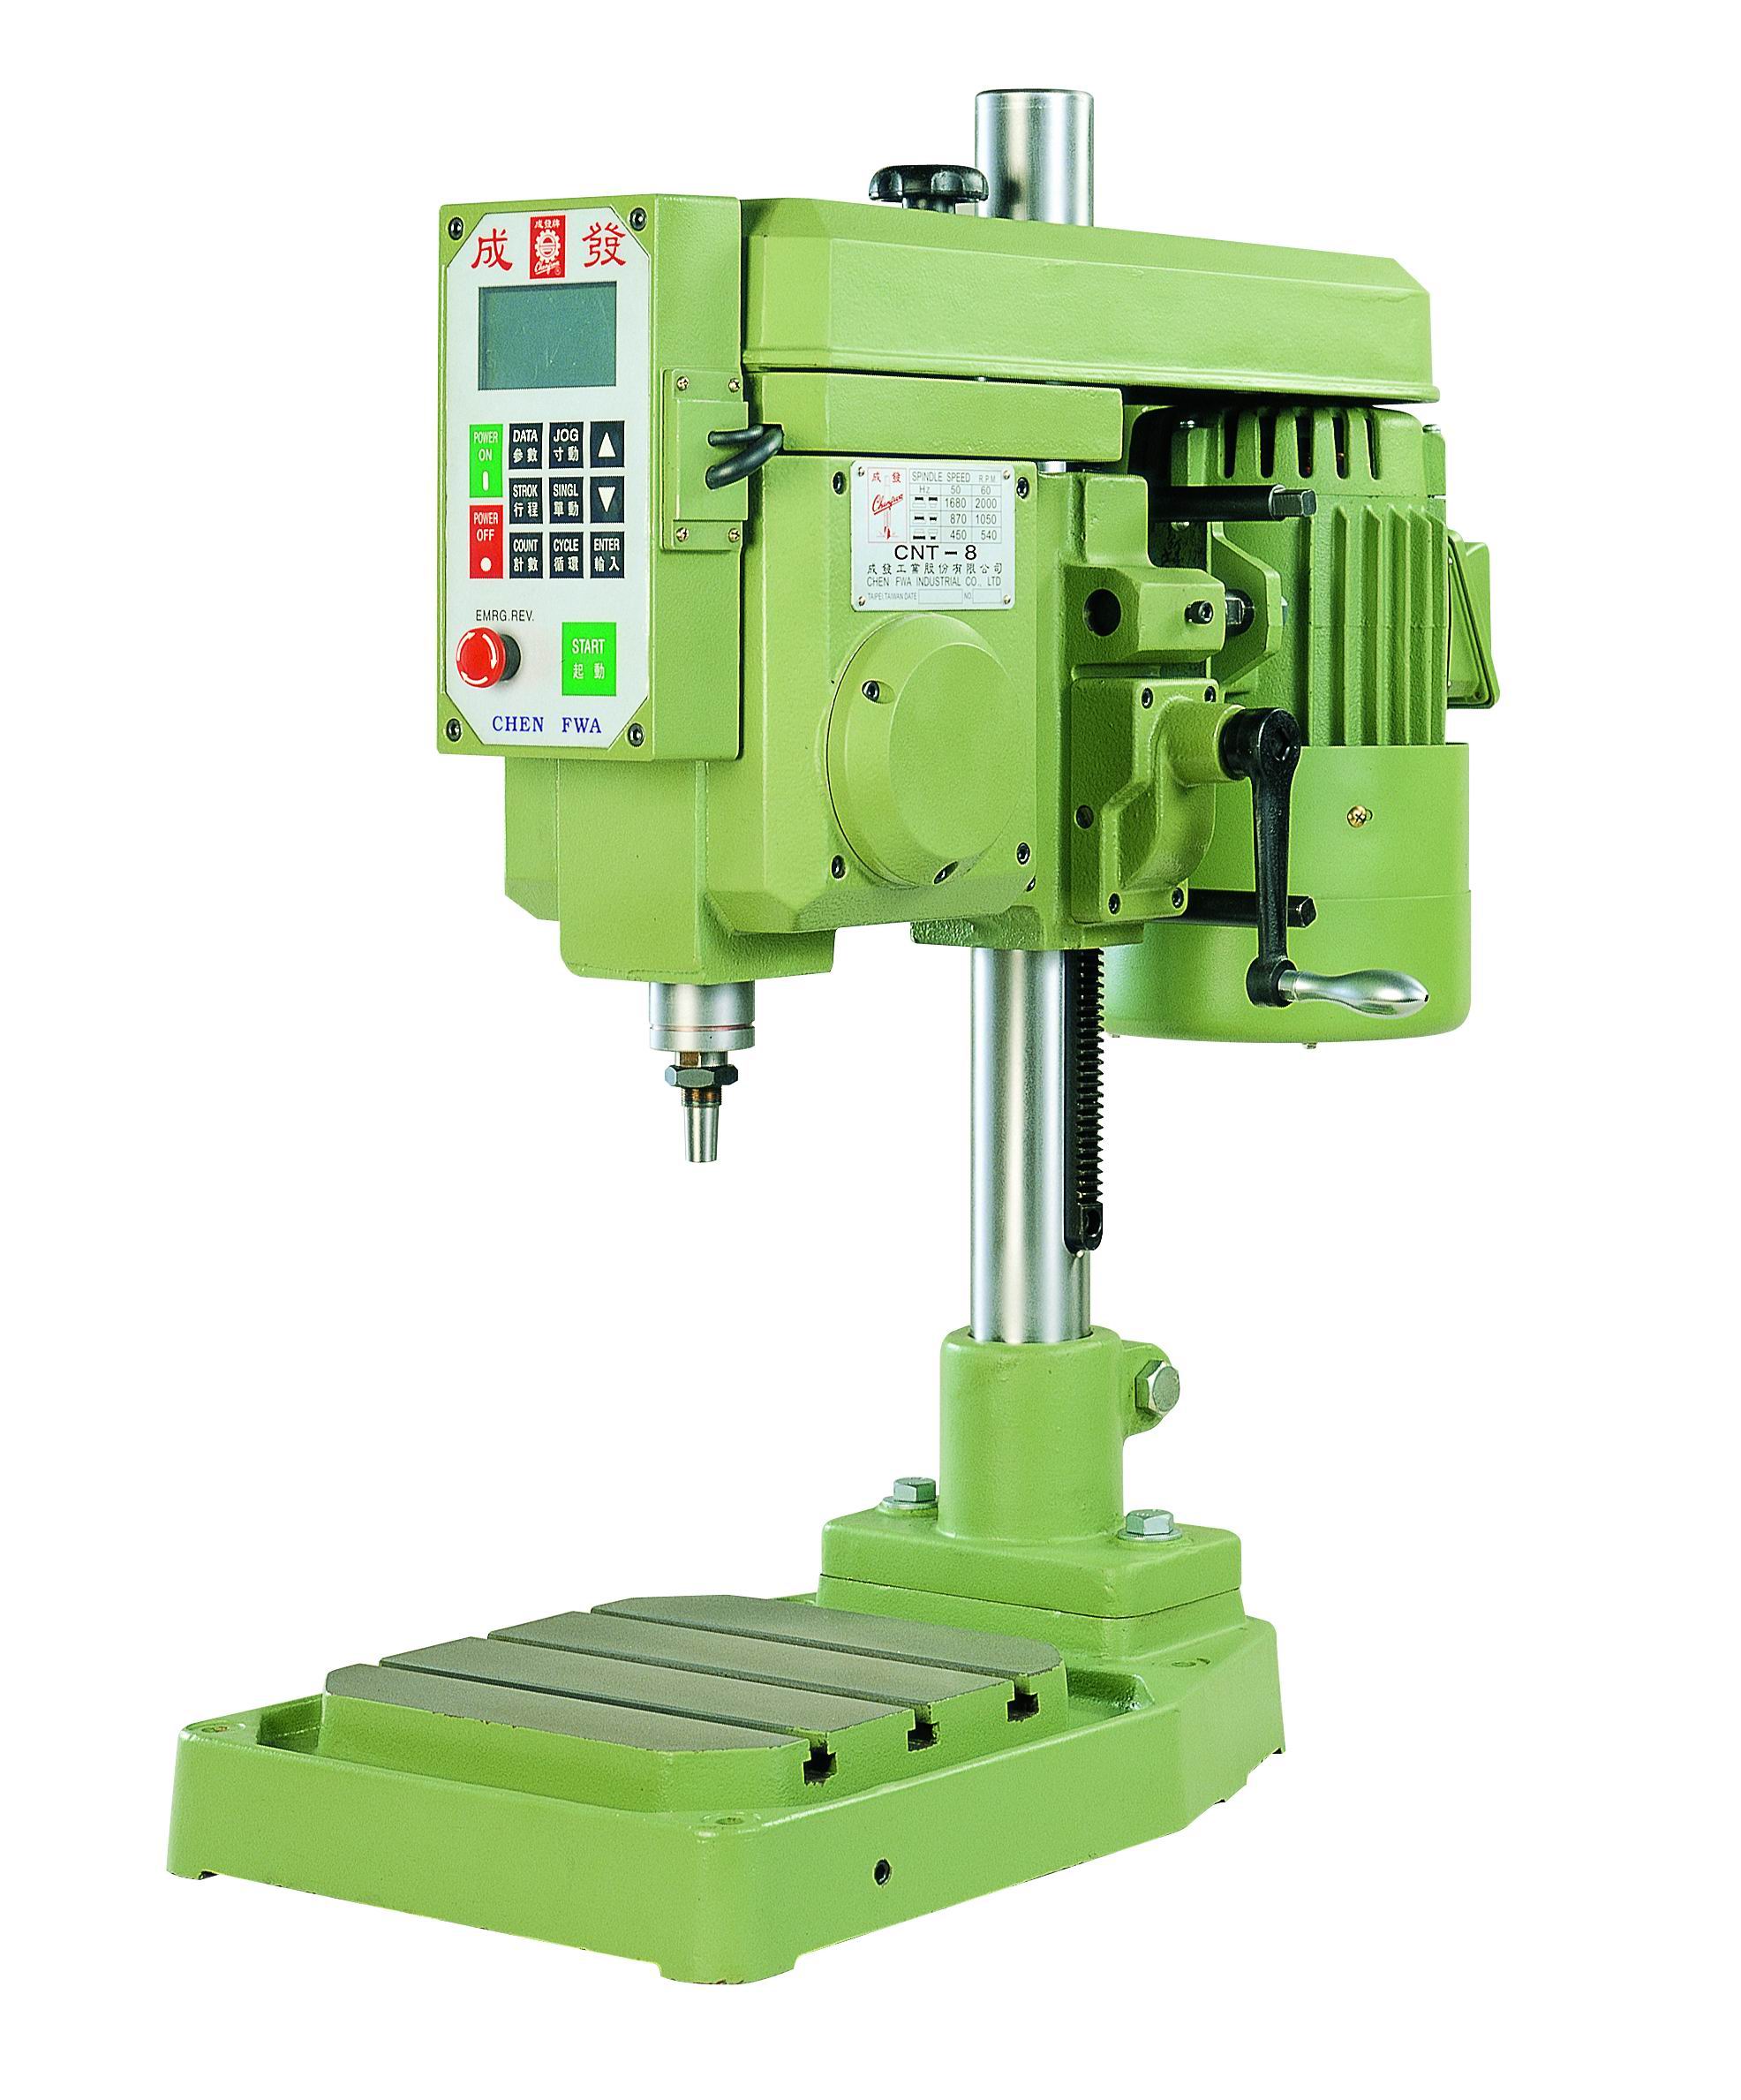 Numerical Control High Speed Auto Tapping Machine-CNT-8